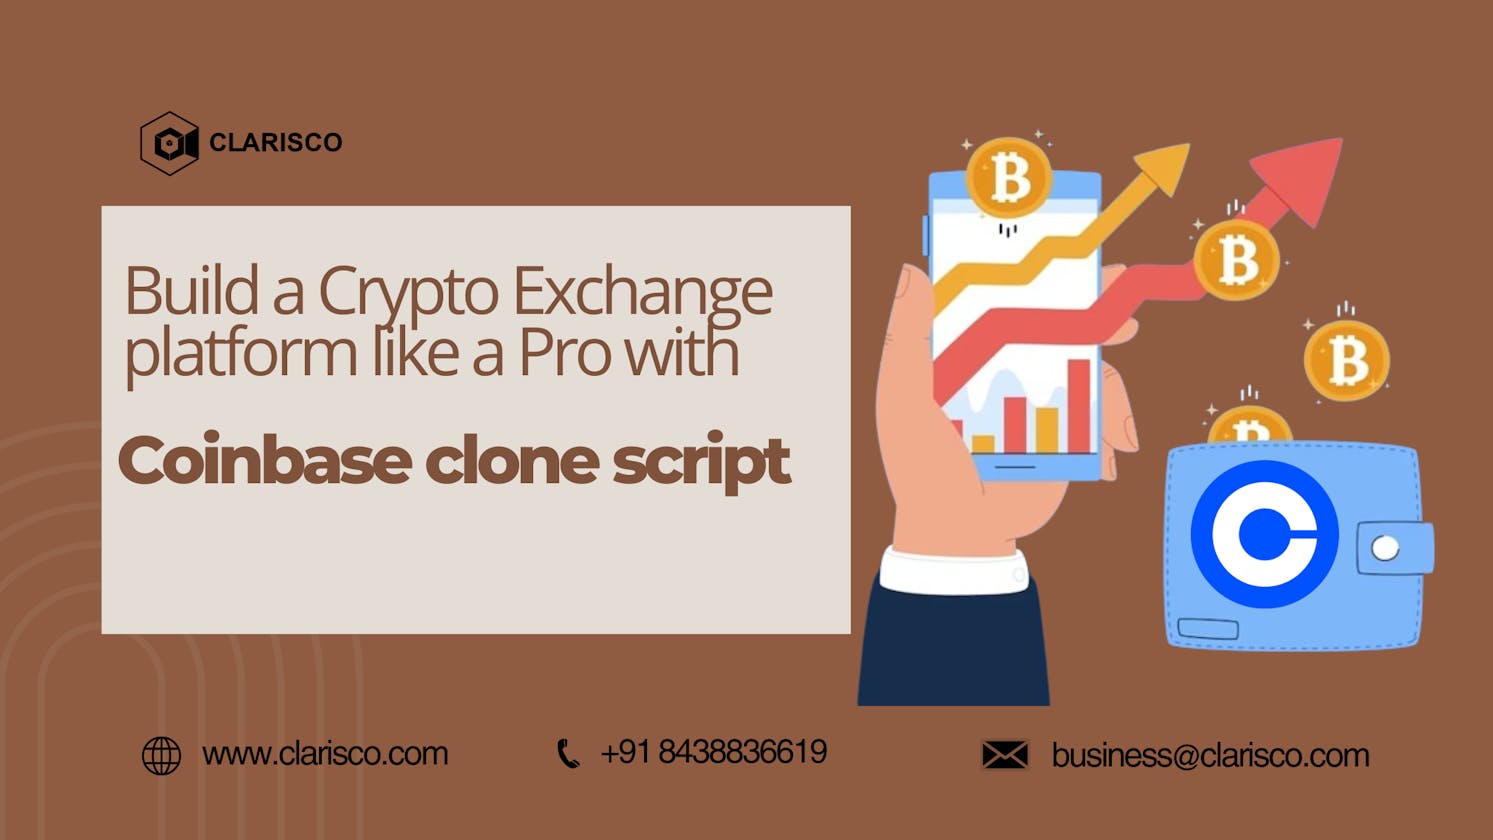 Build a Crypto Exchange platform like a Pro with a Coinbase clone script